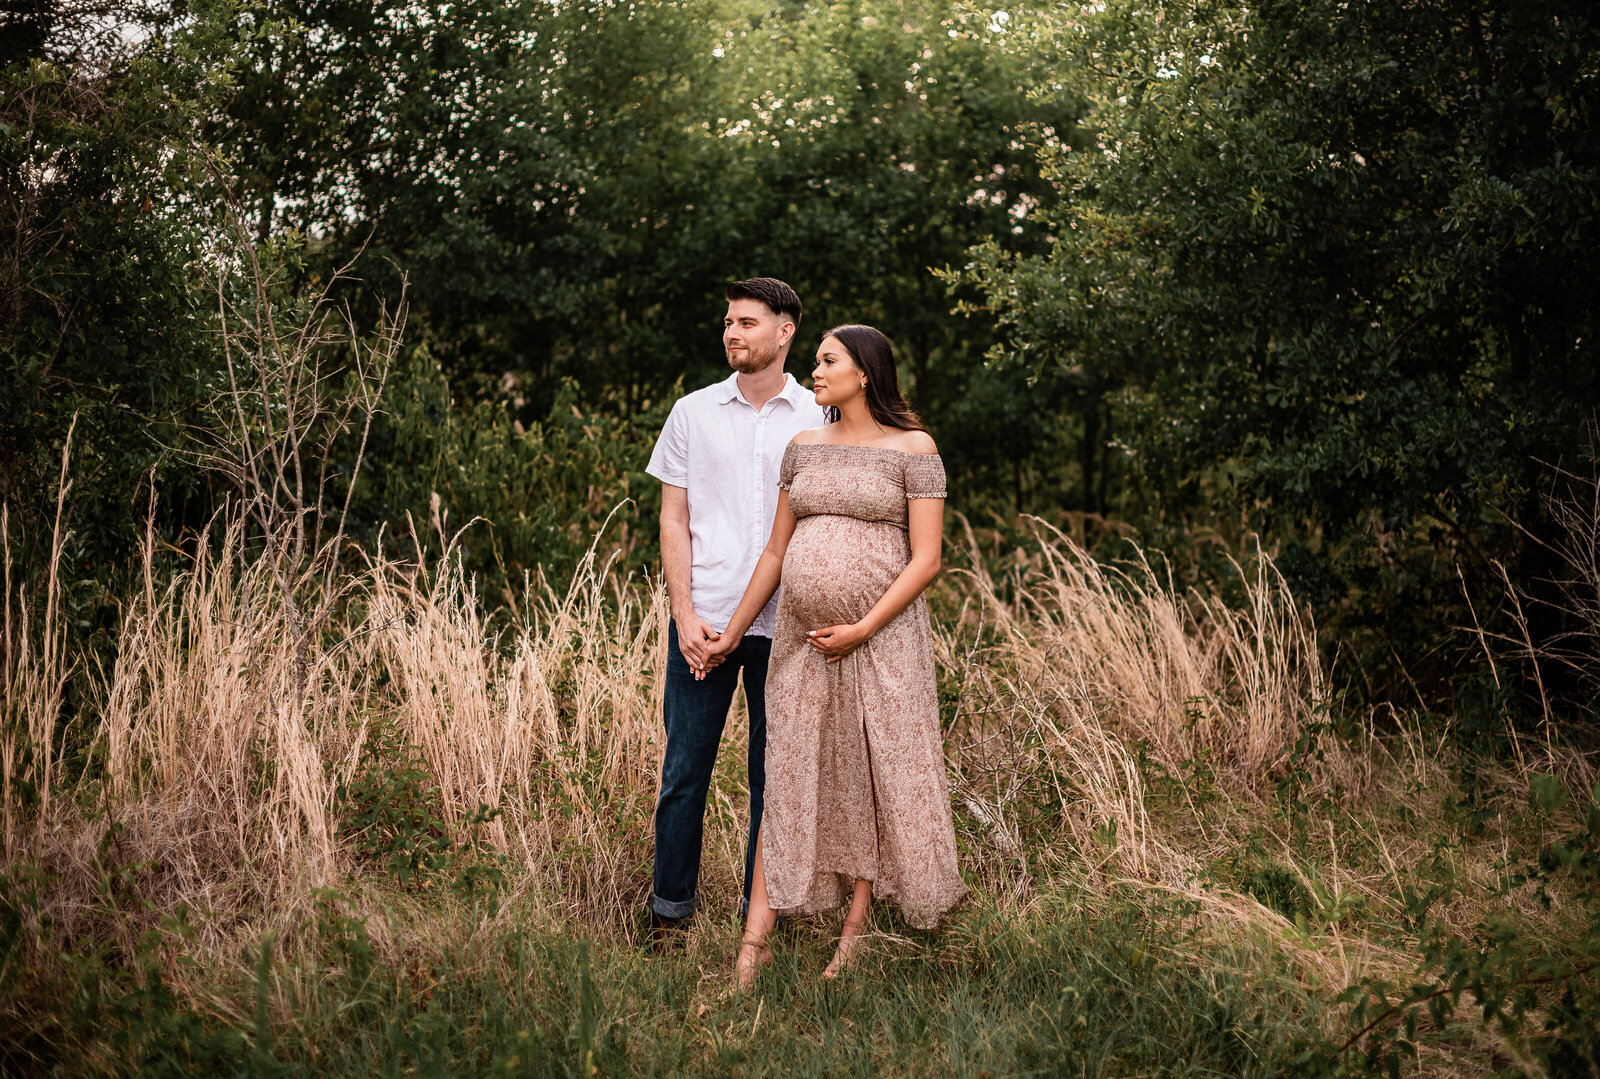 A pregnant couple stand in a field with golden grass and hold hands while looking to their right.